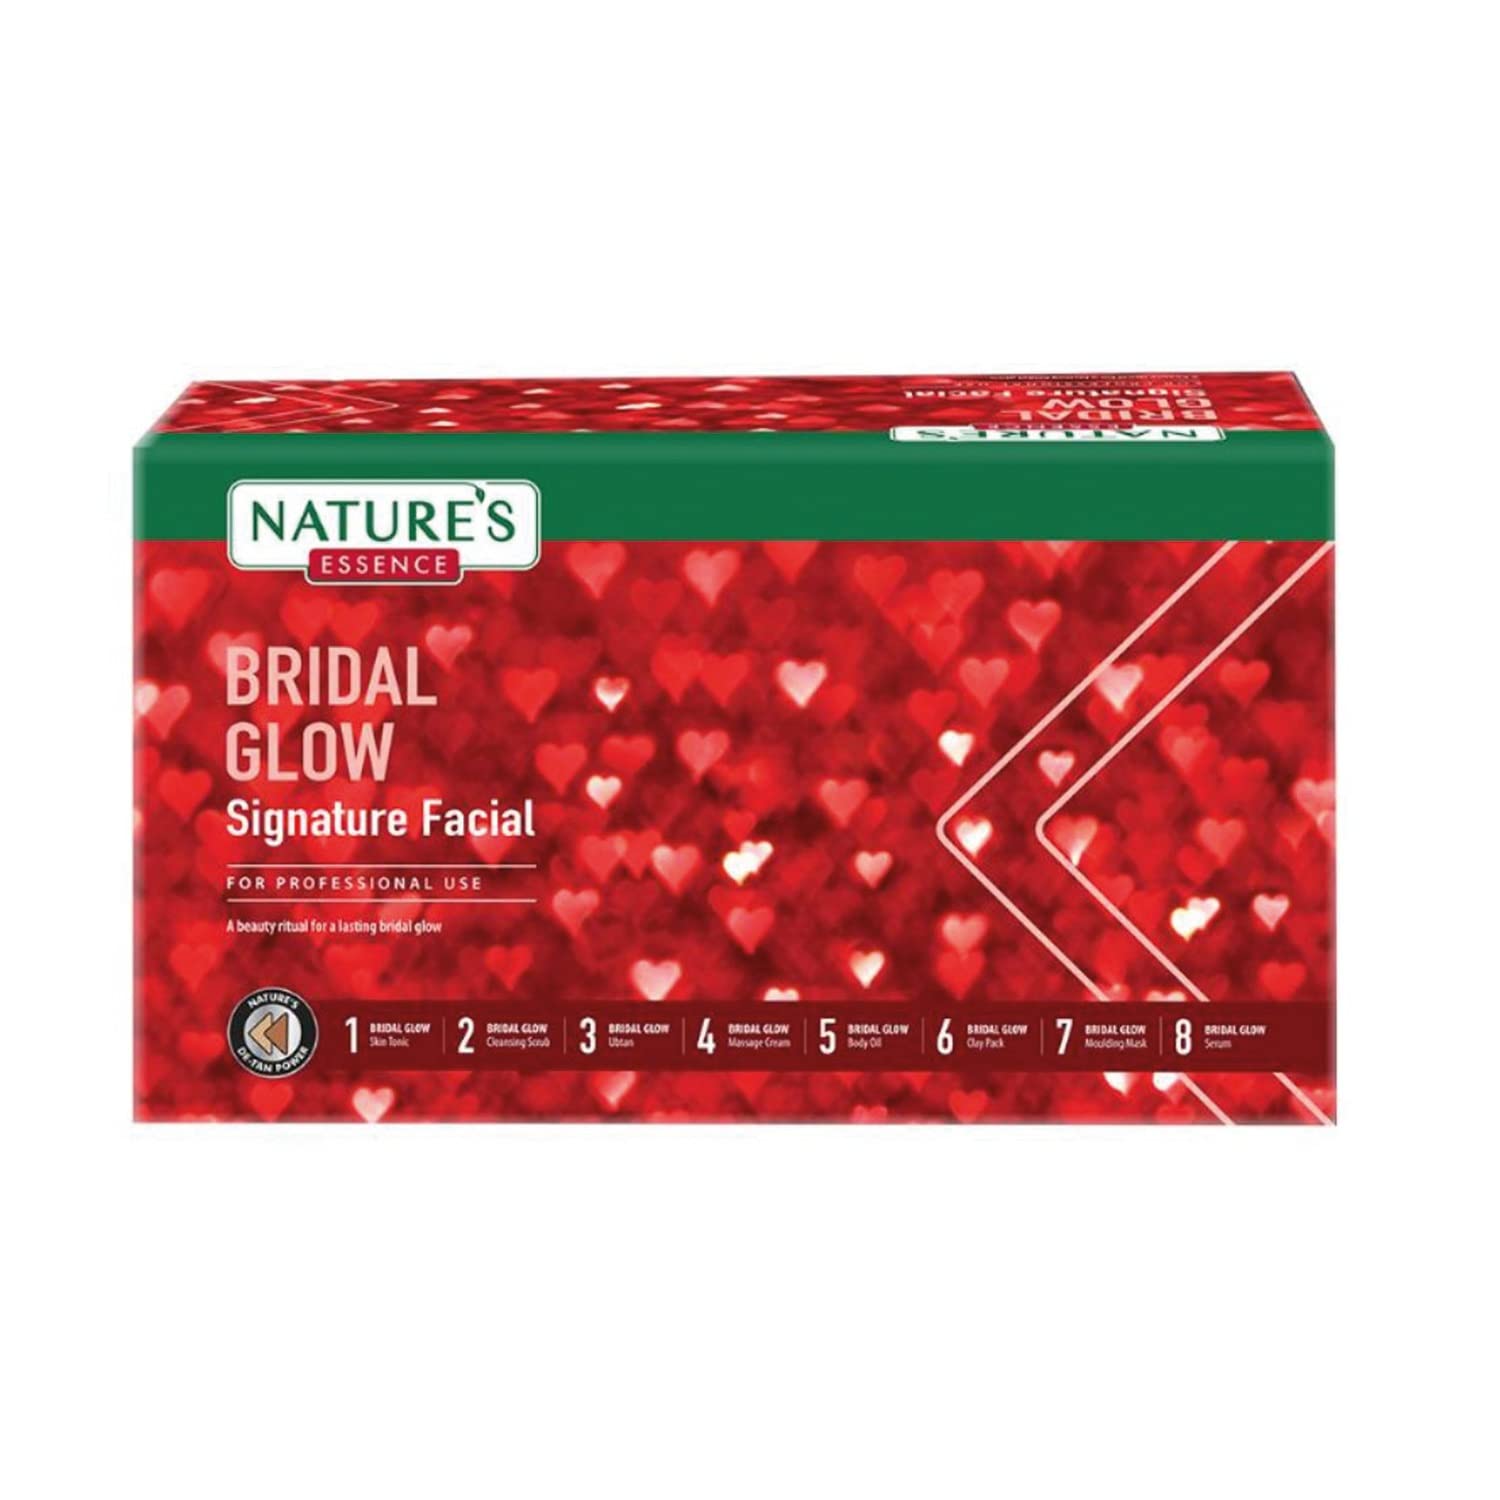 NATURE'S ESSENCE Bridal Glow Signature Facial Kit, A beauty ritual for a lasting bridal glow 6N Cream